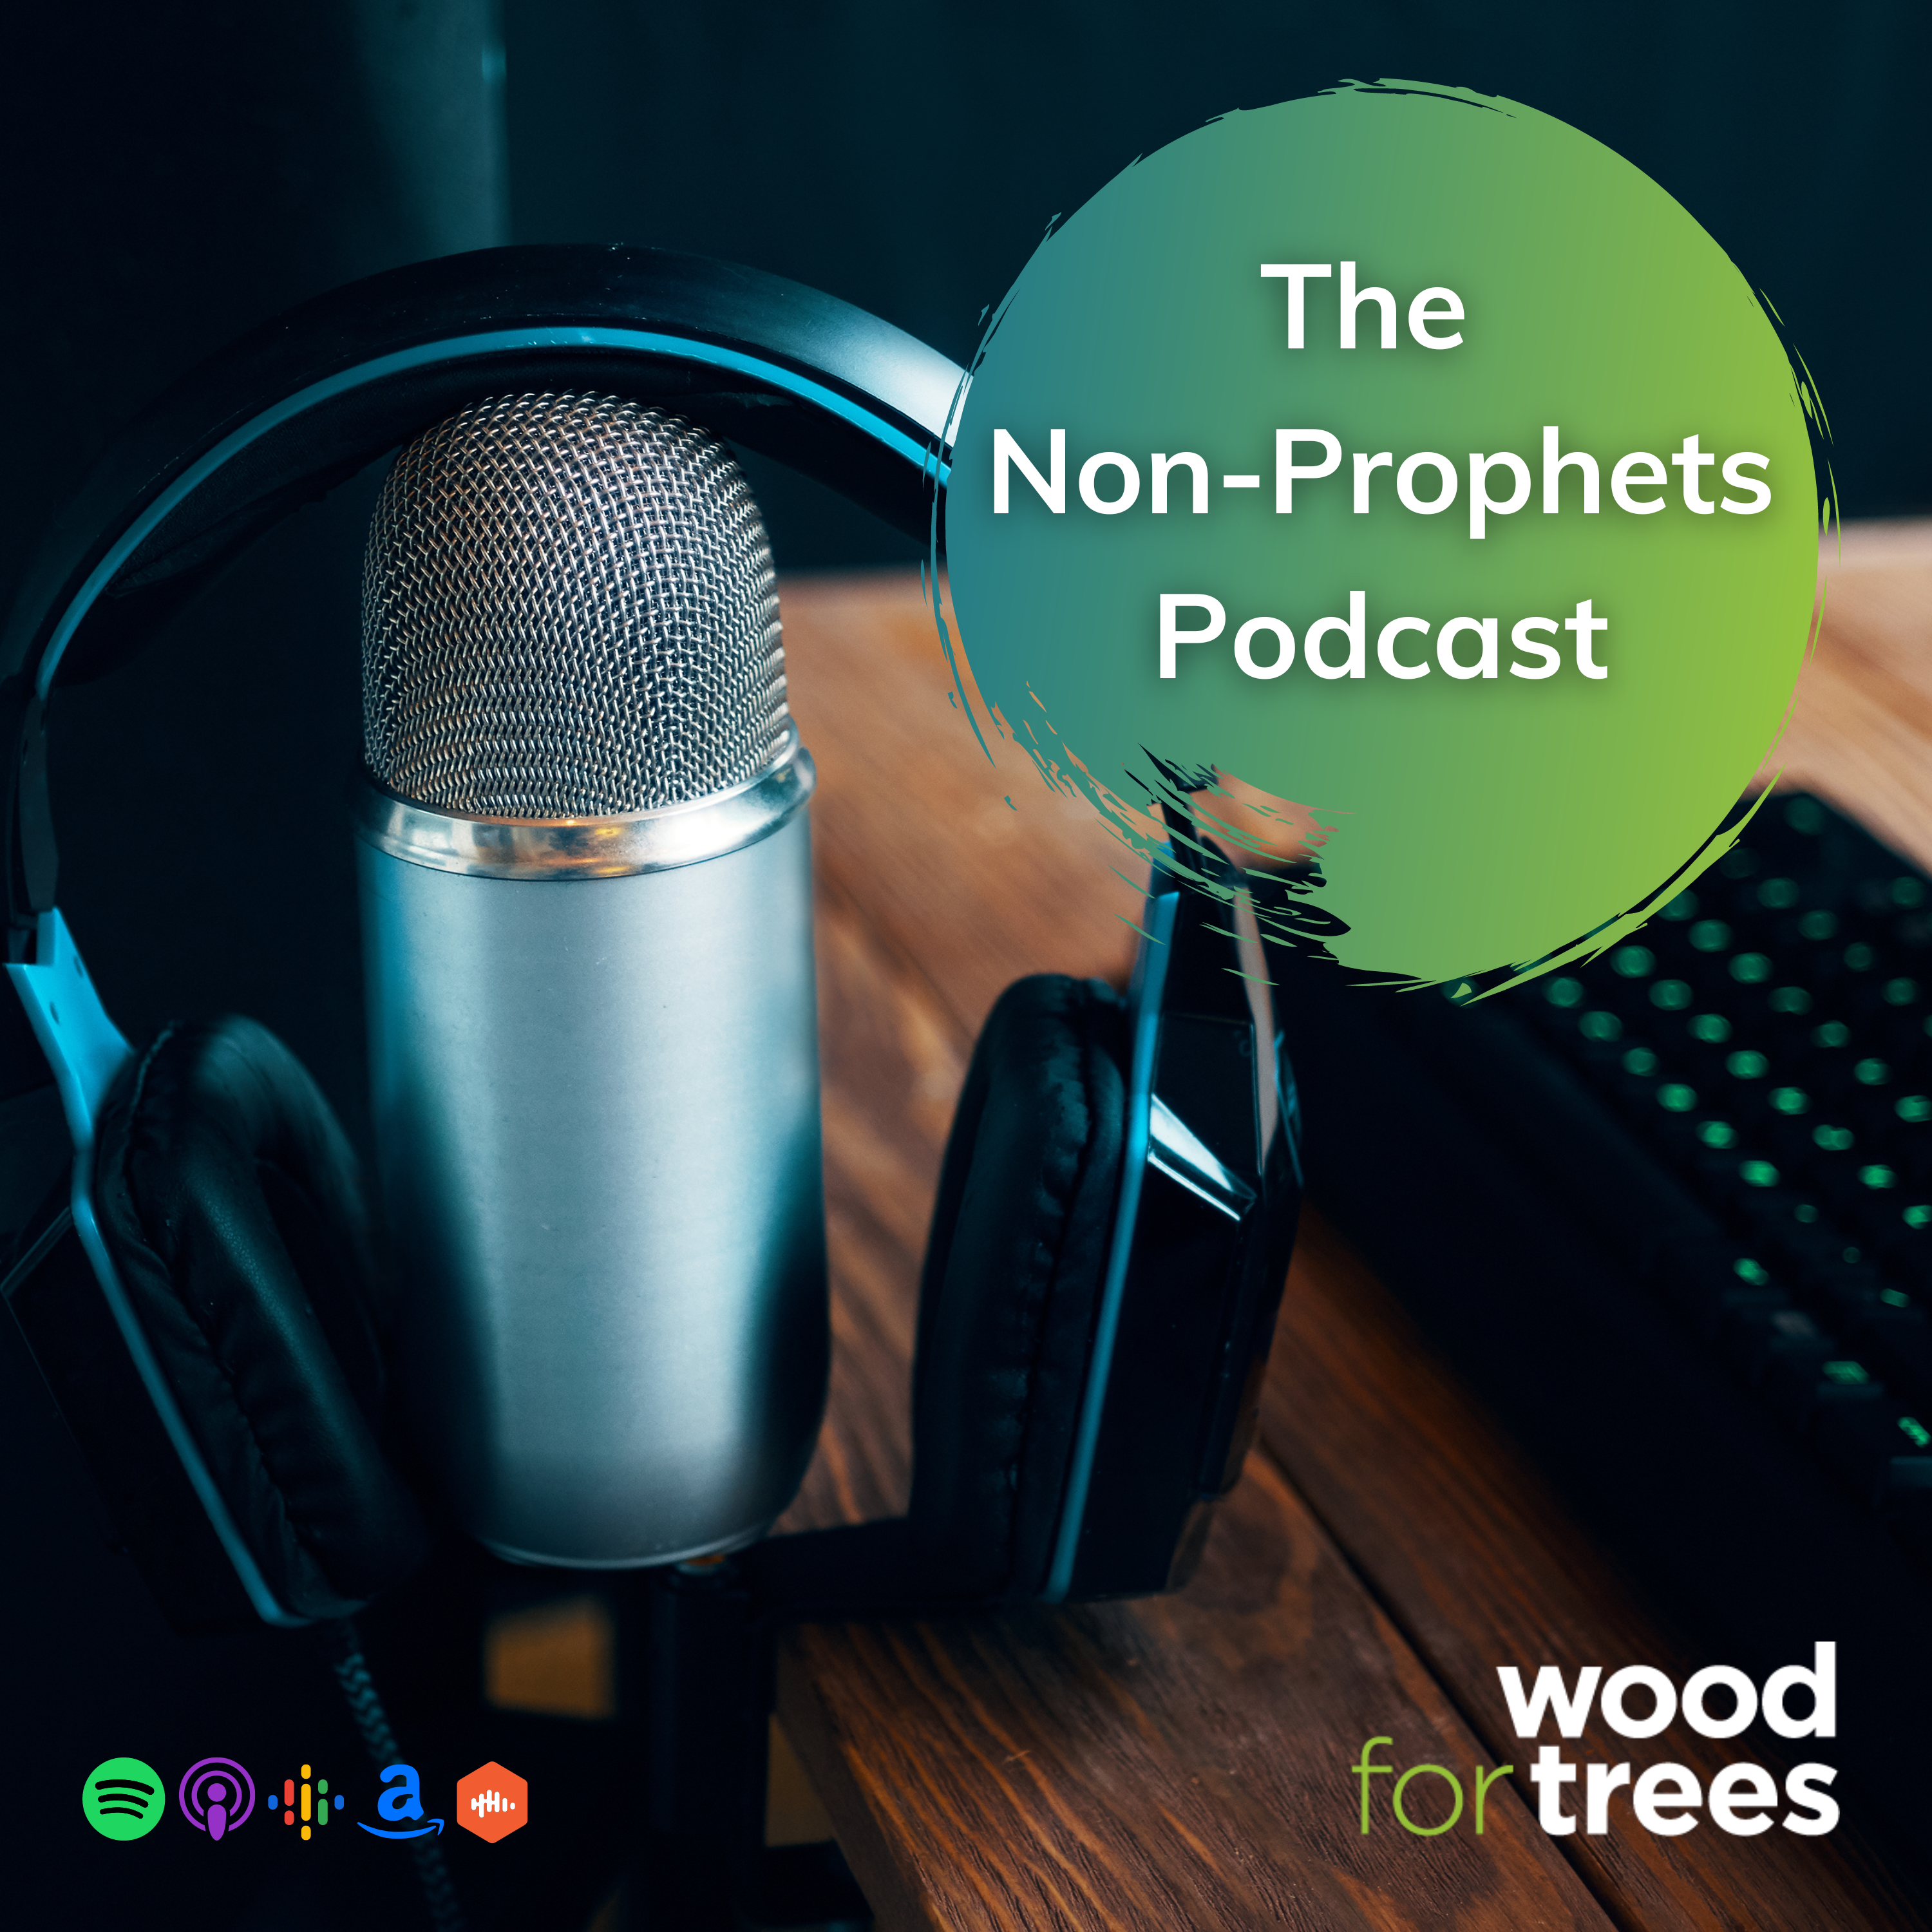 the non-prophets podcast